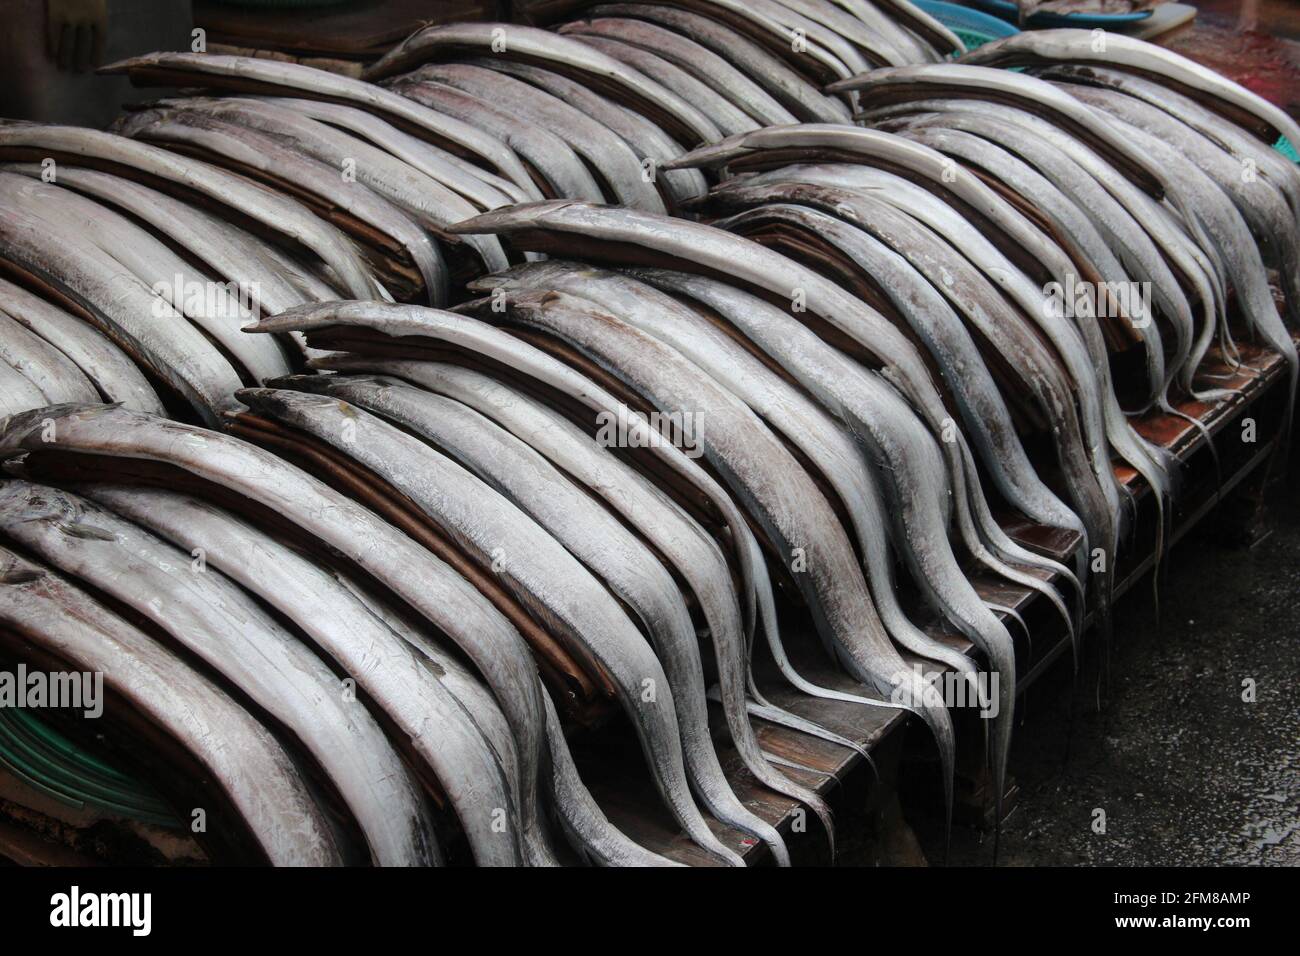 Fish on display in a seafood market in Busan, South Korea Stock Photo